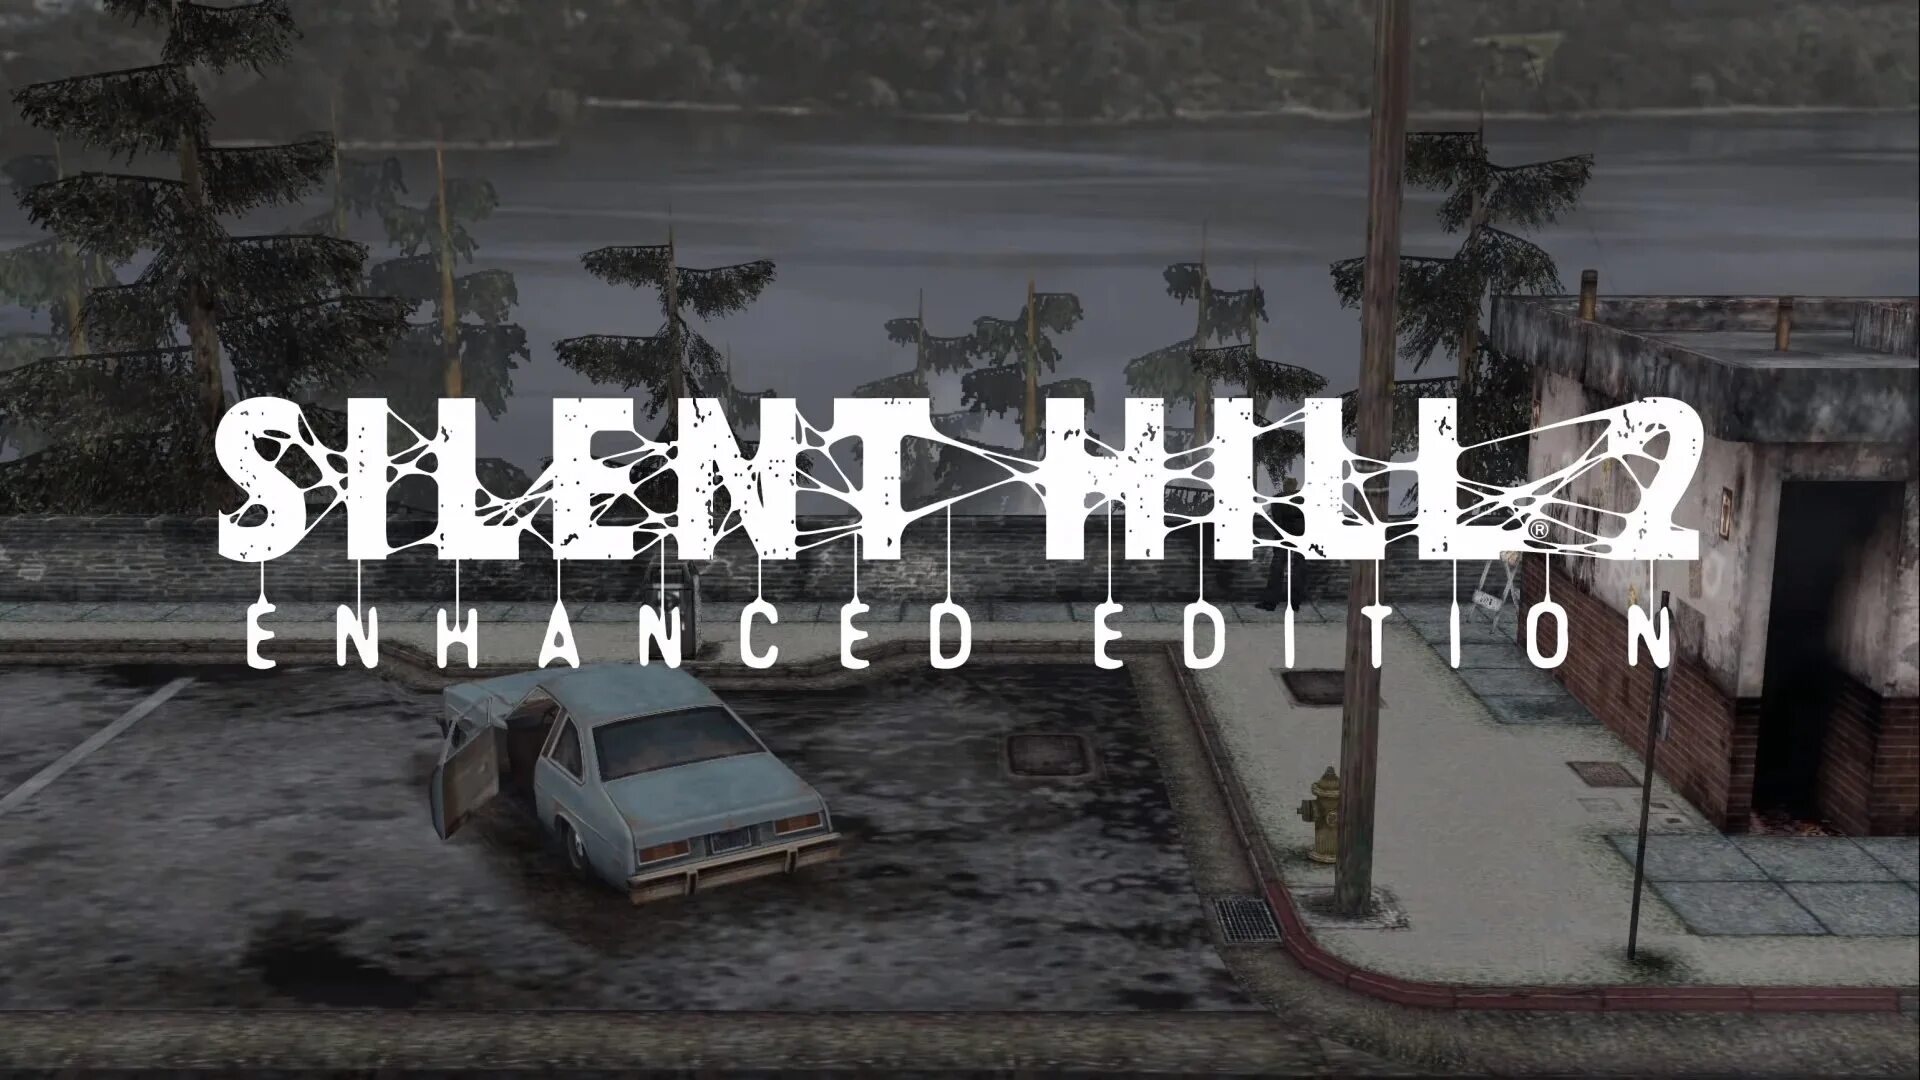 Silent Hill 2 Director's Cut New Edition: enhanced Edition. Silent hill new edition